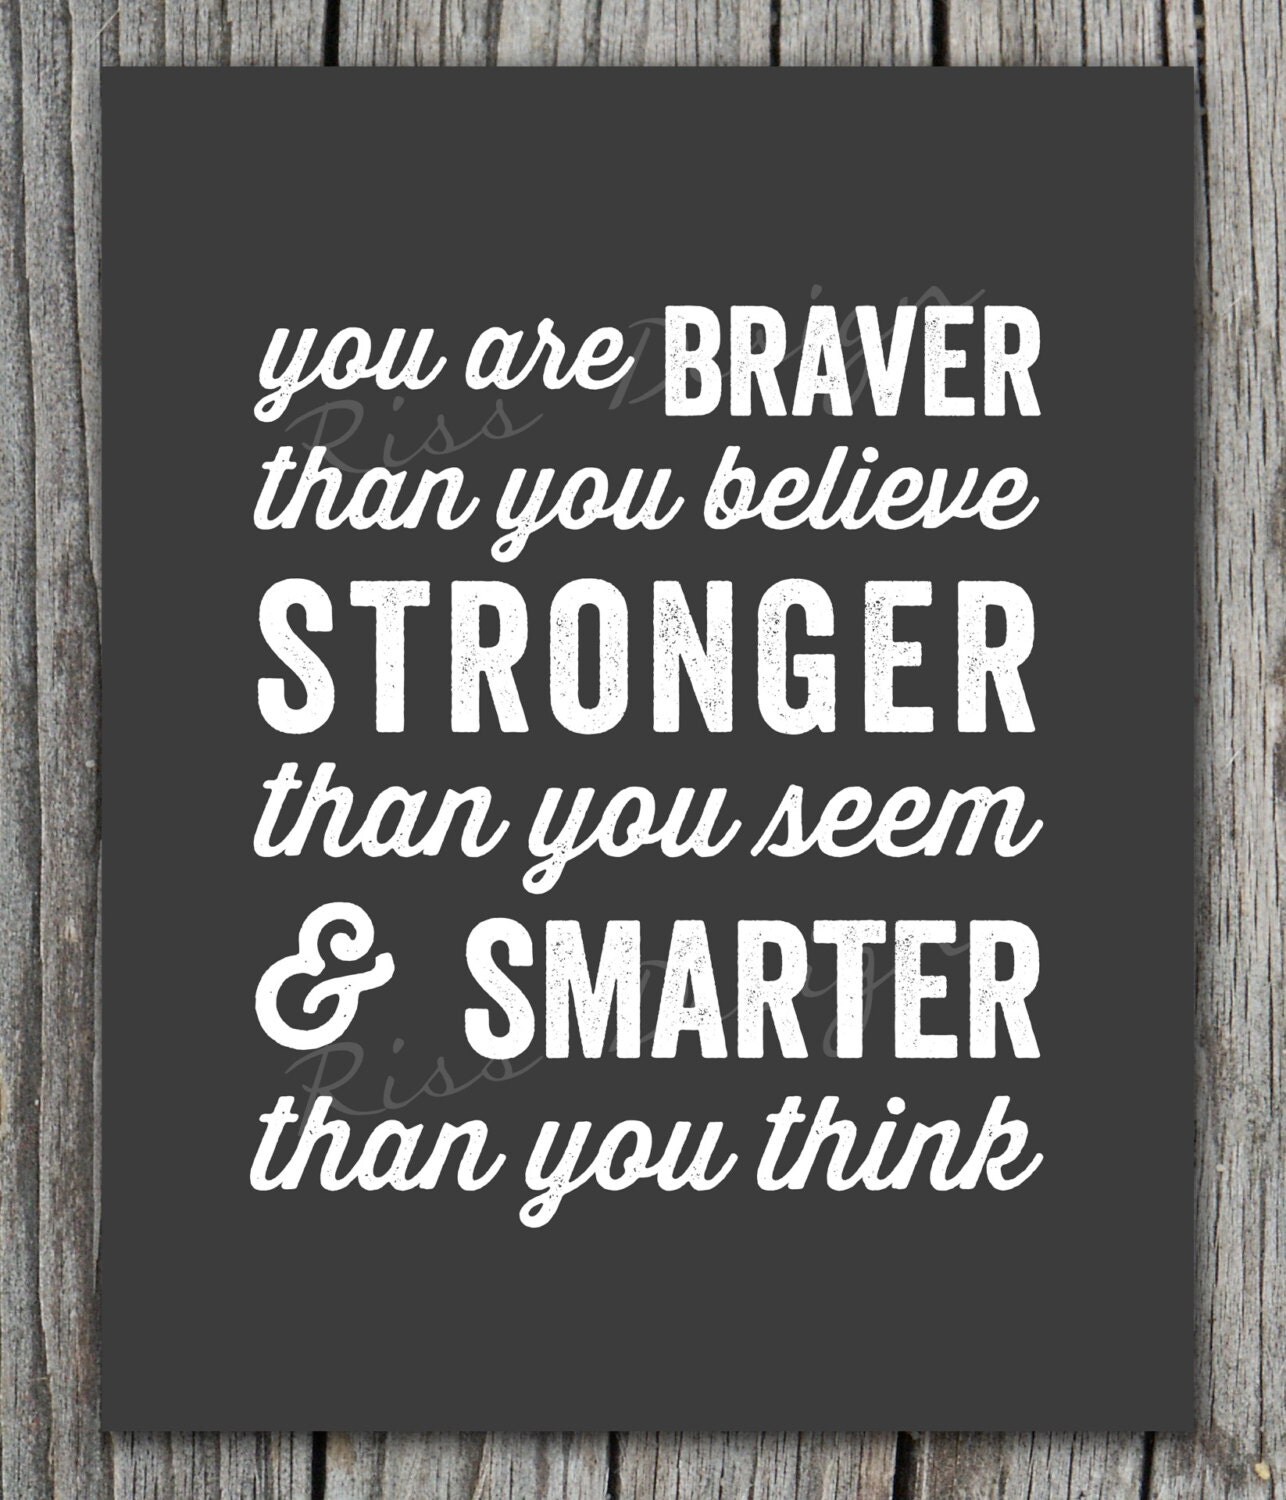 You are braver than you believe stronger than you seem